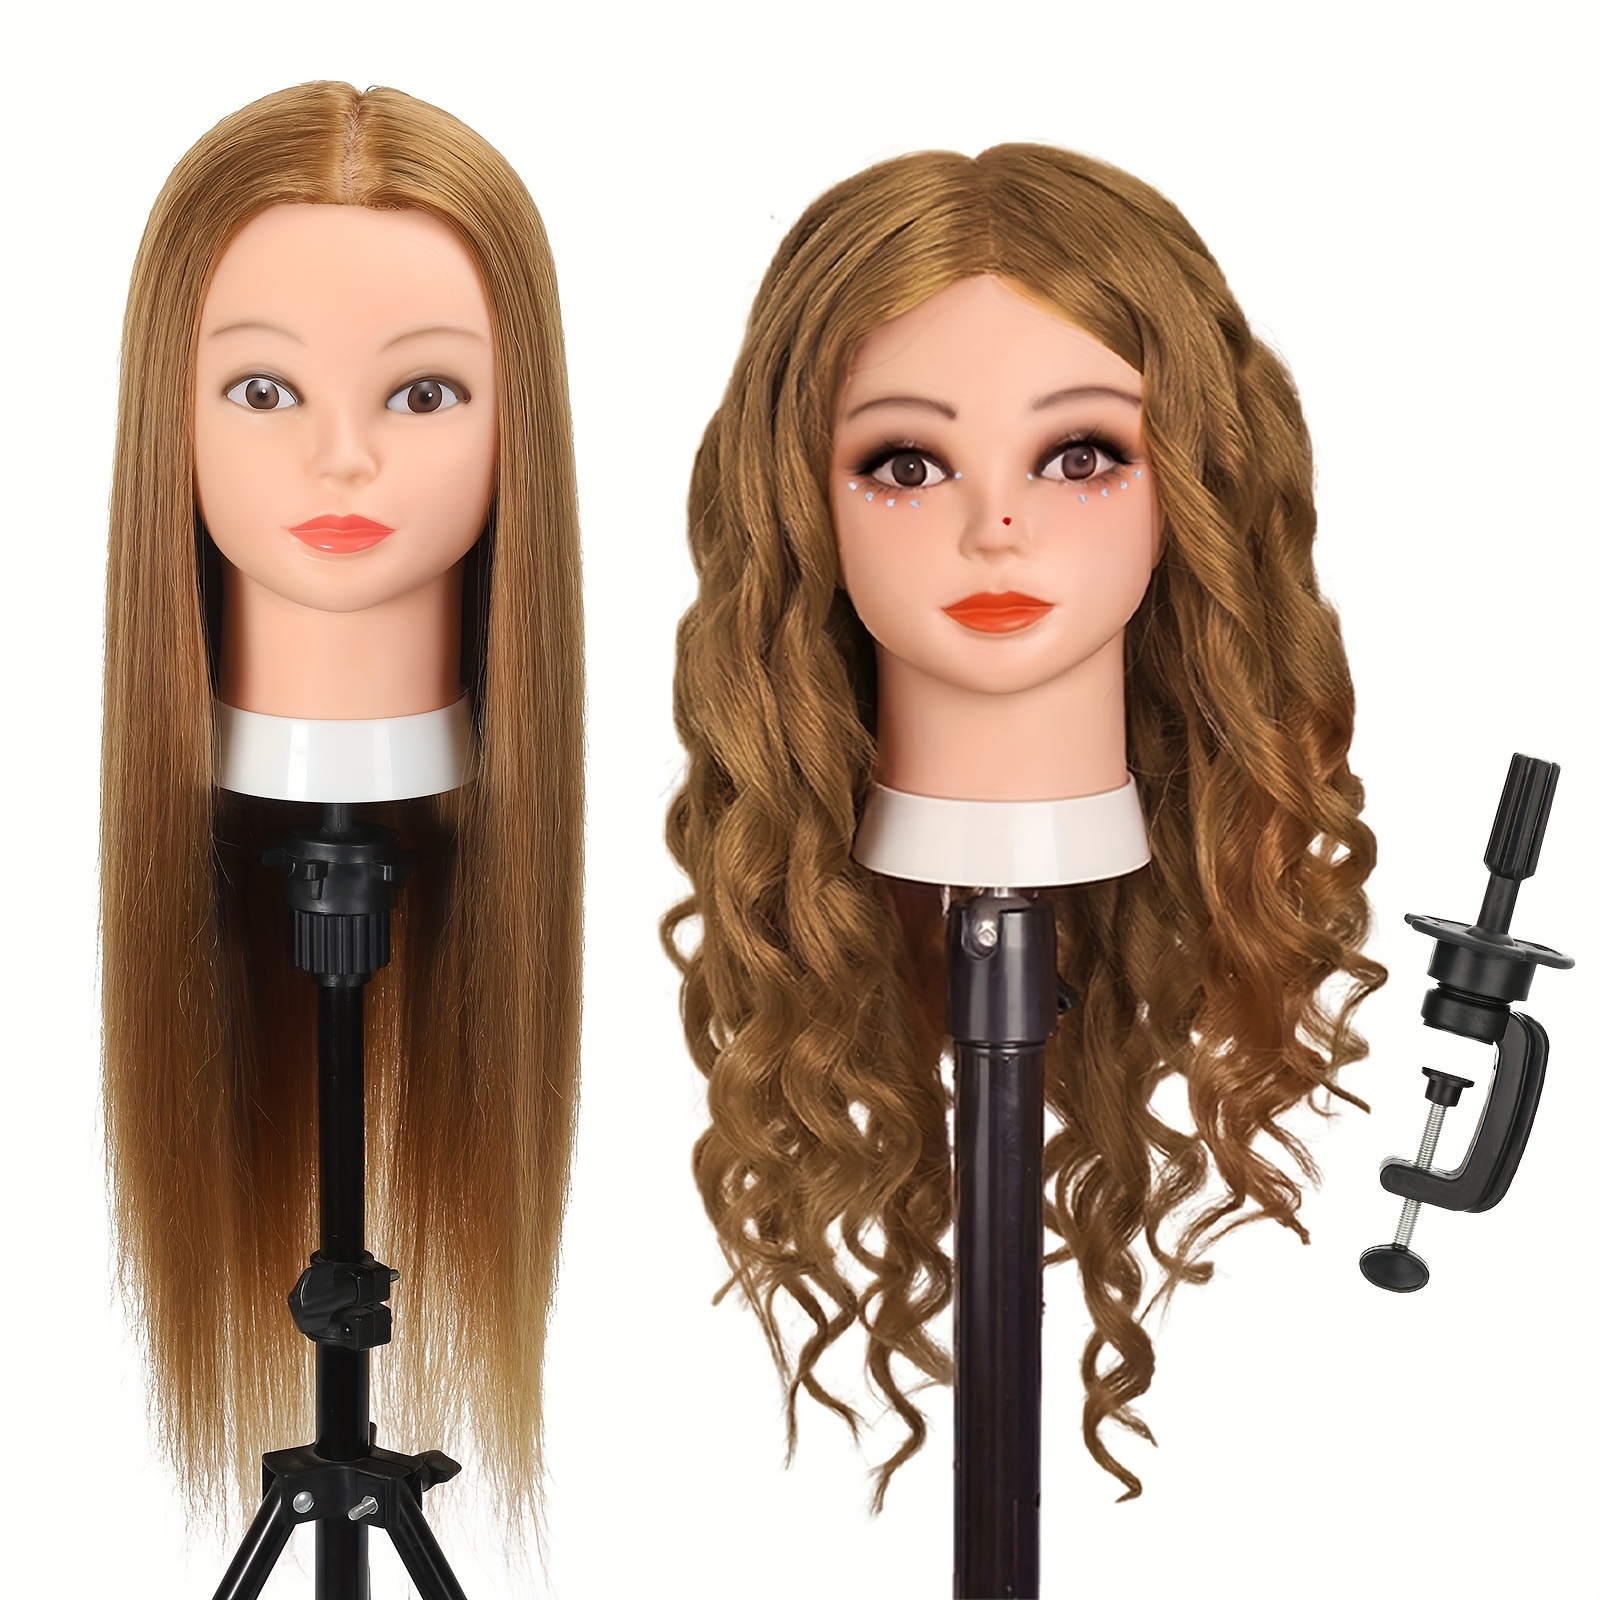 Mannequin Head with 65cm Hair for Hairstyles Training Hairdressing Practice